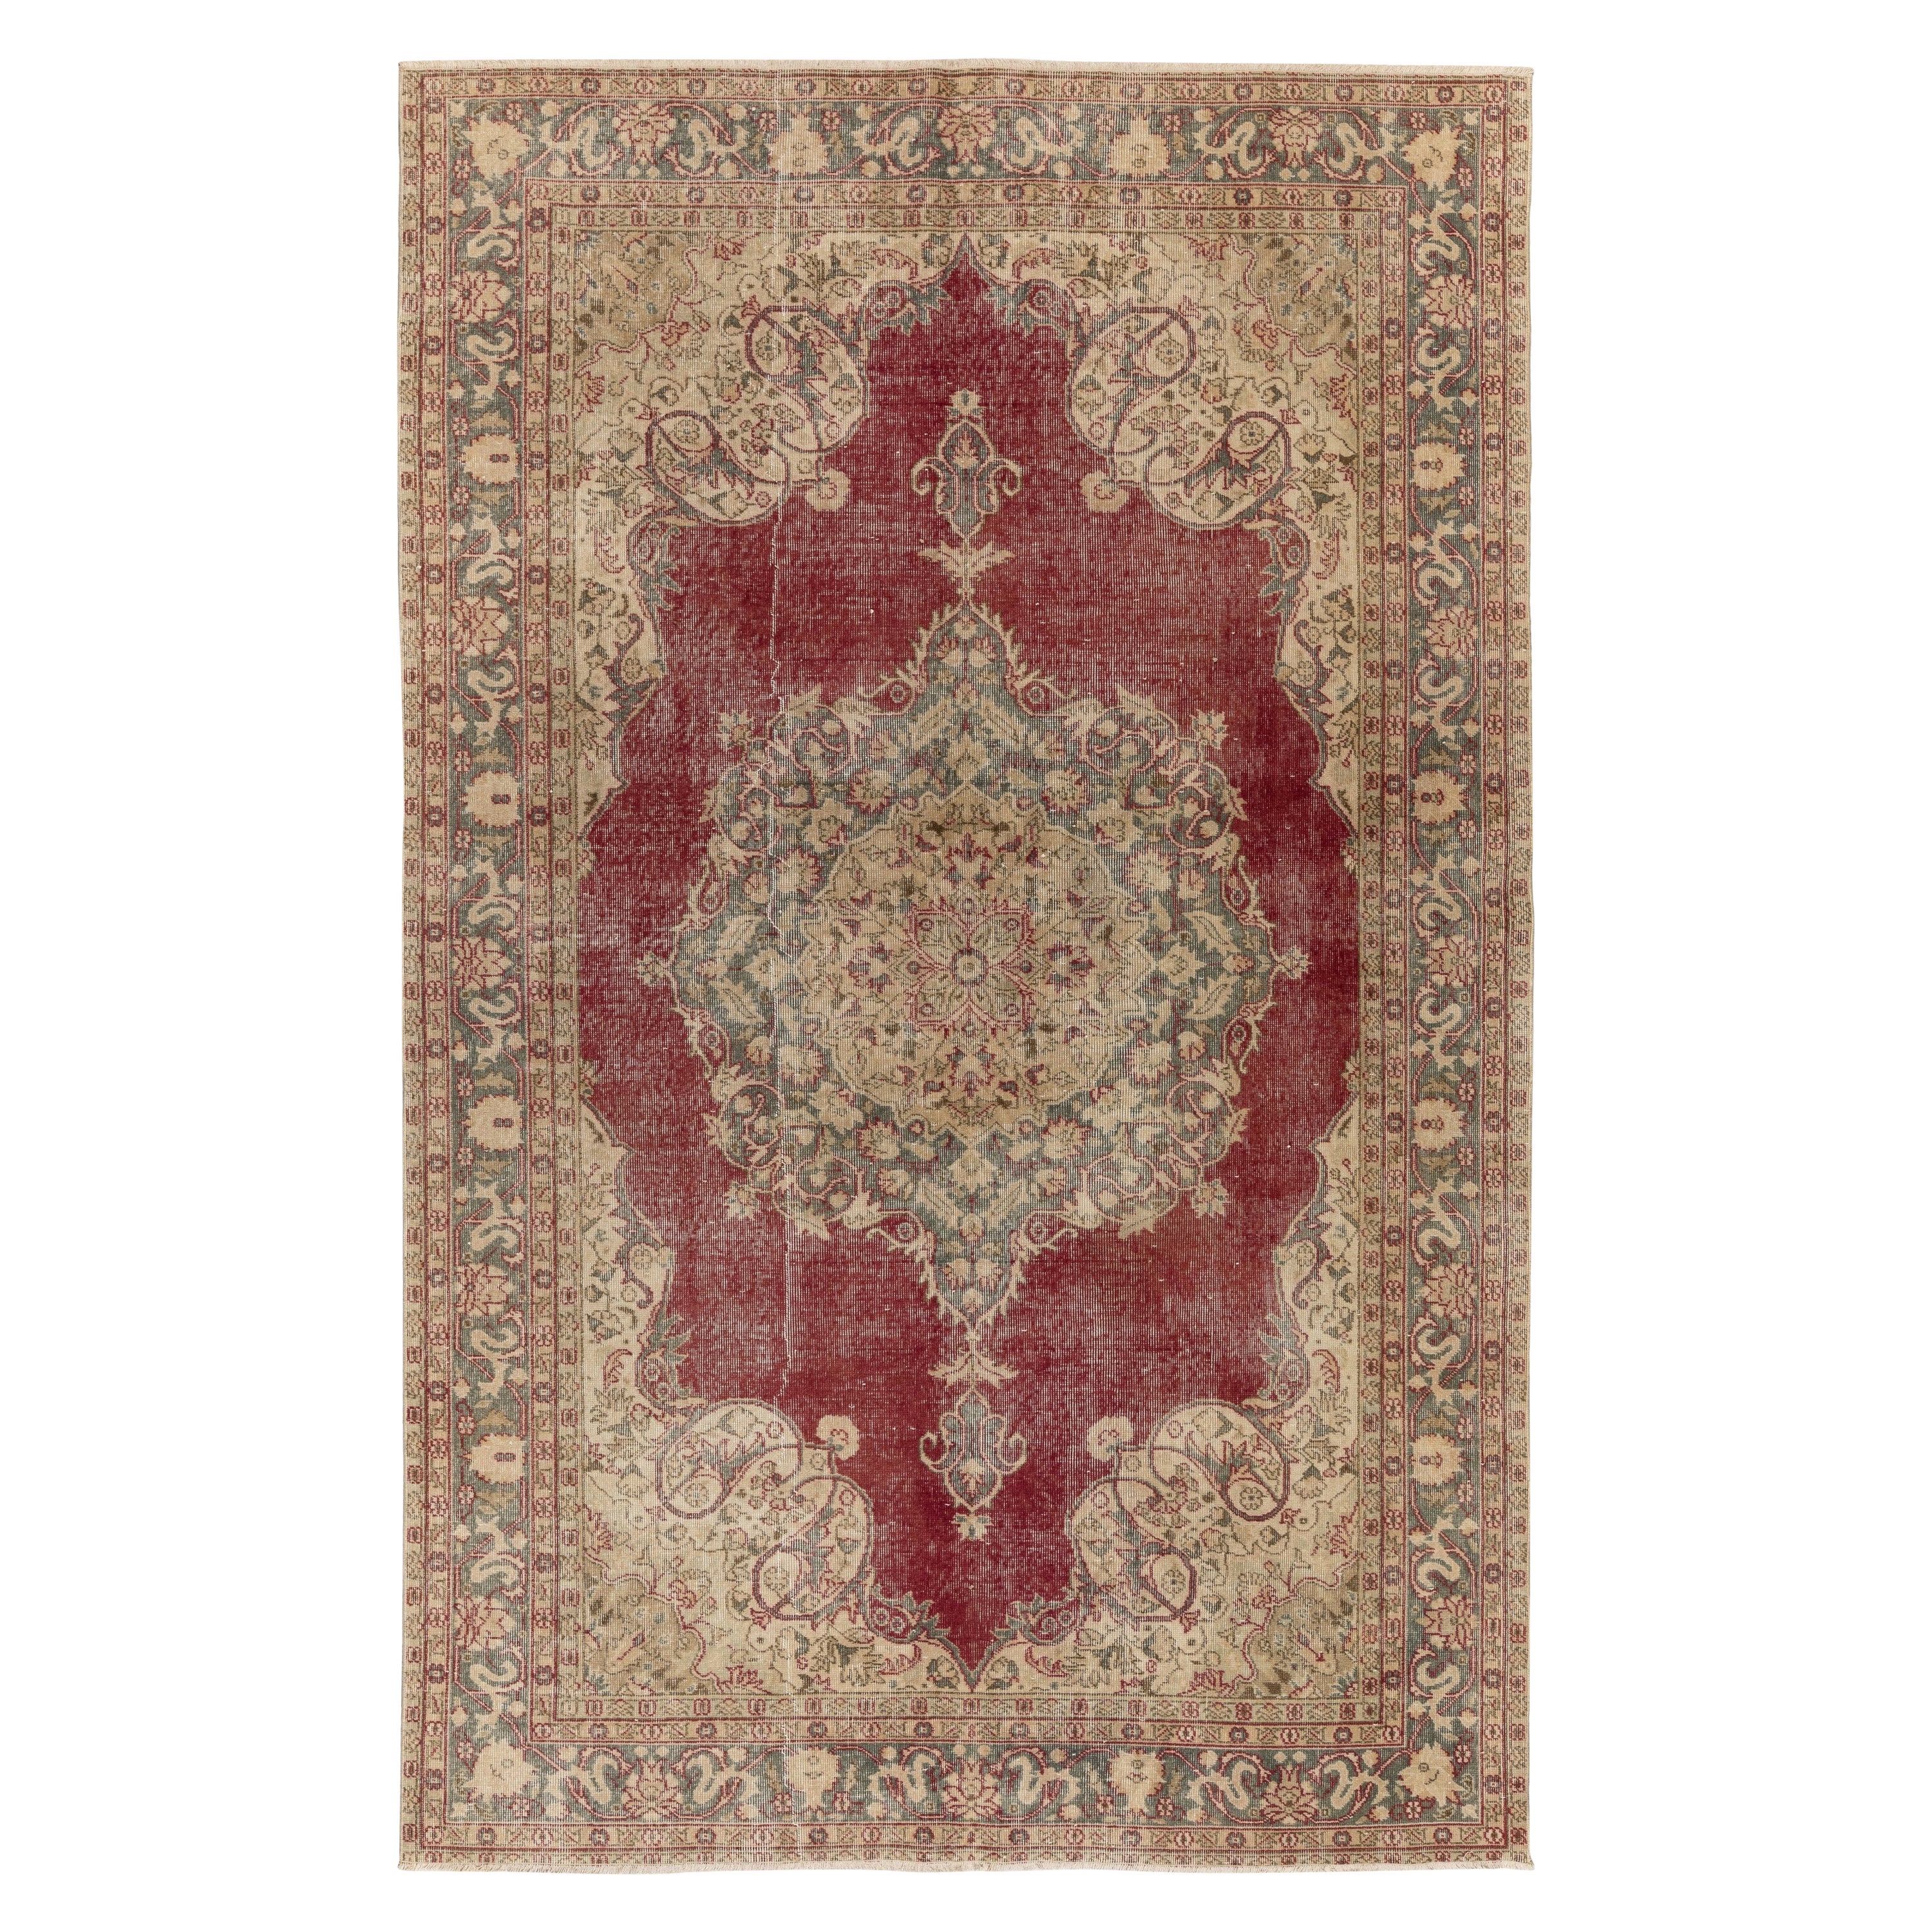 6.5x9.7 Ft Hand-Knotted Vintage Turkish Oushak Wool Area Rug in Red and Beige